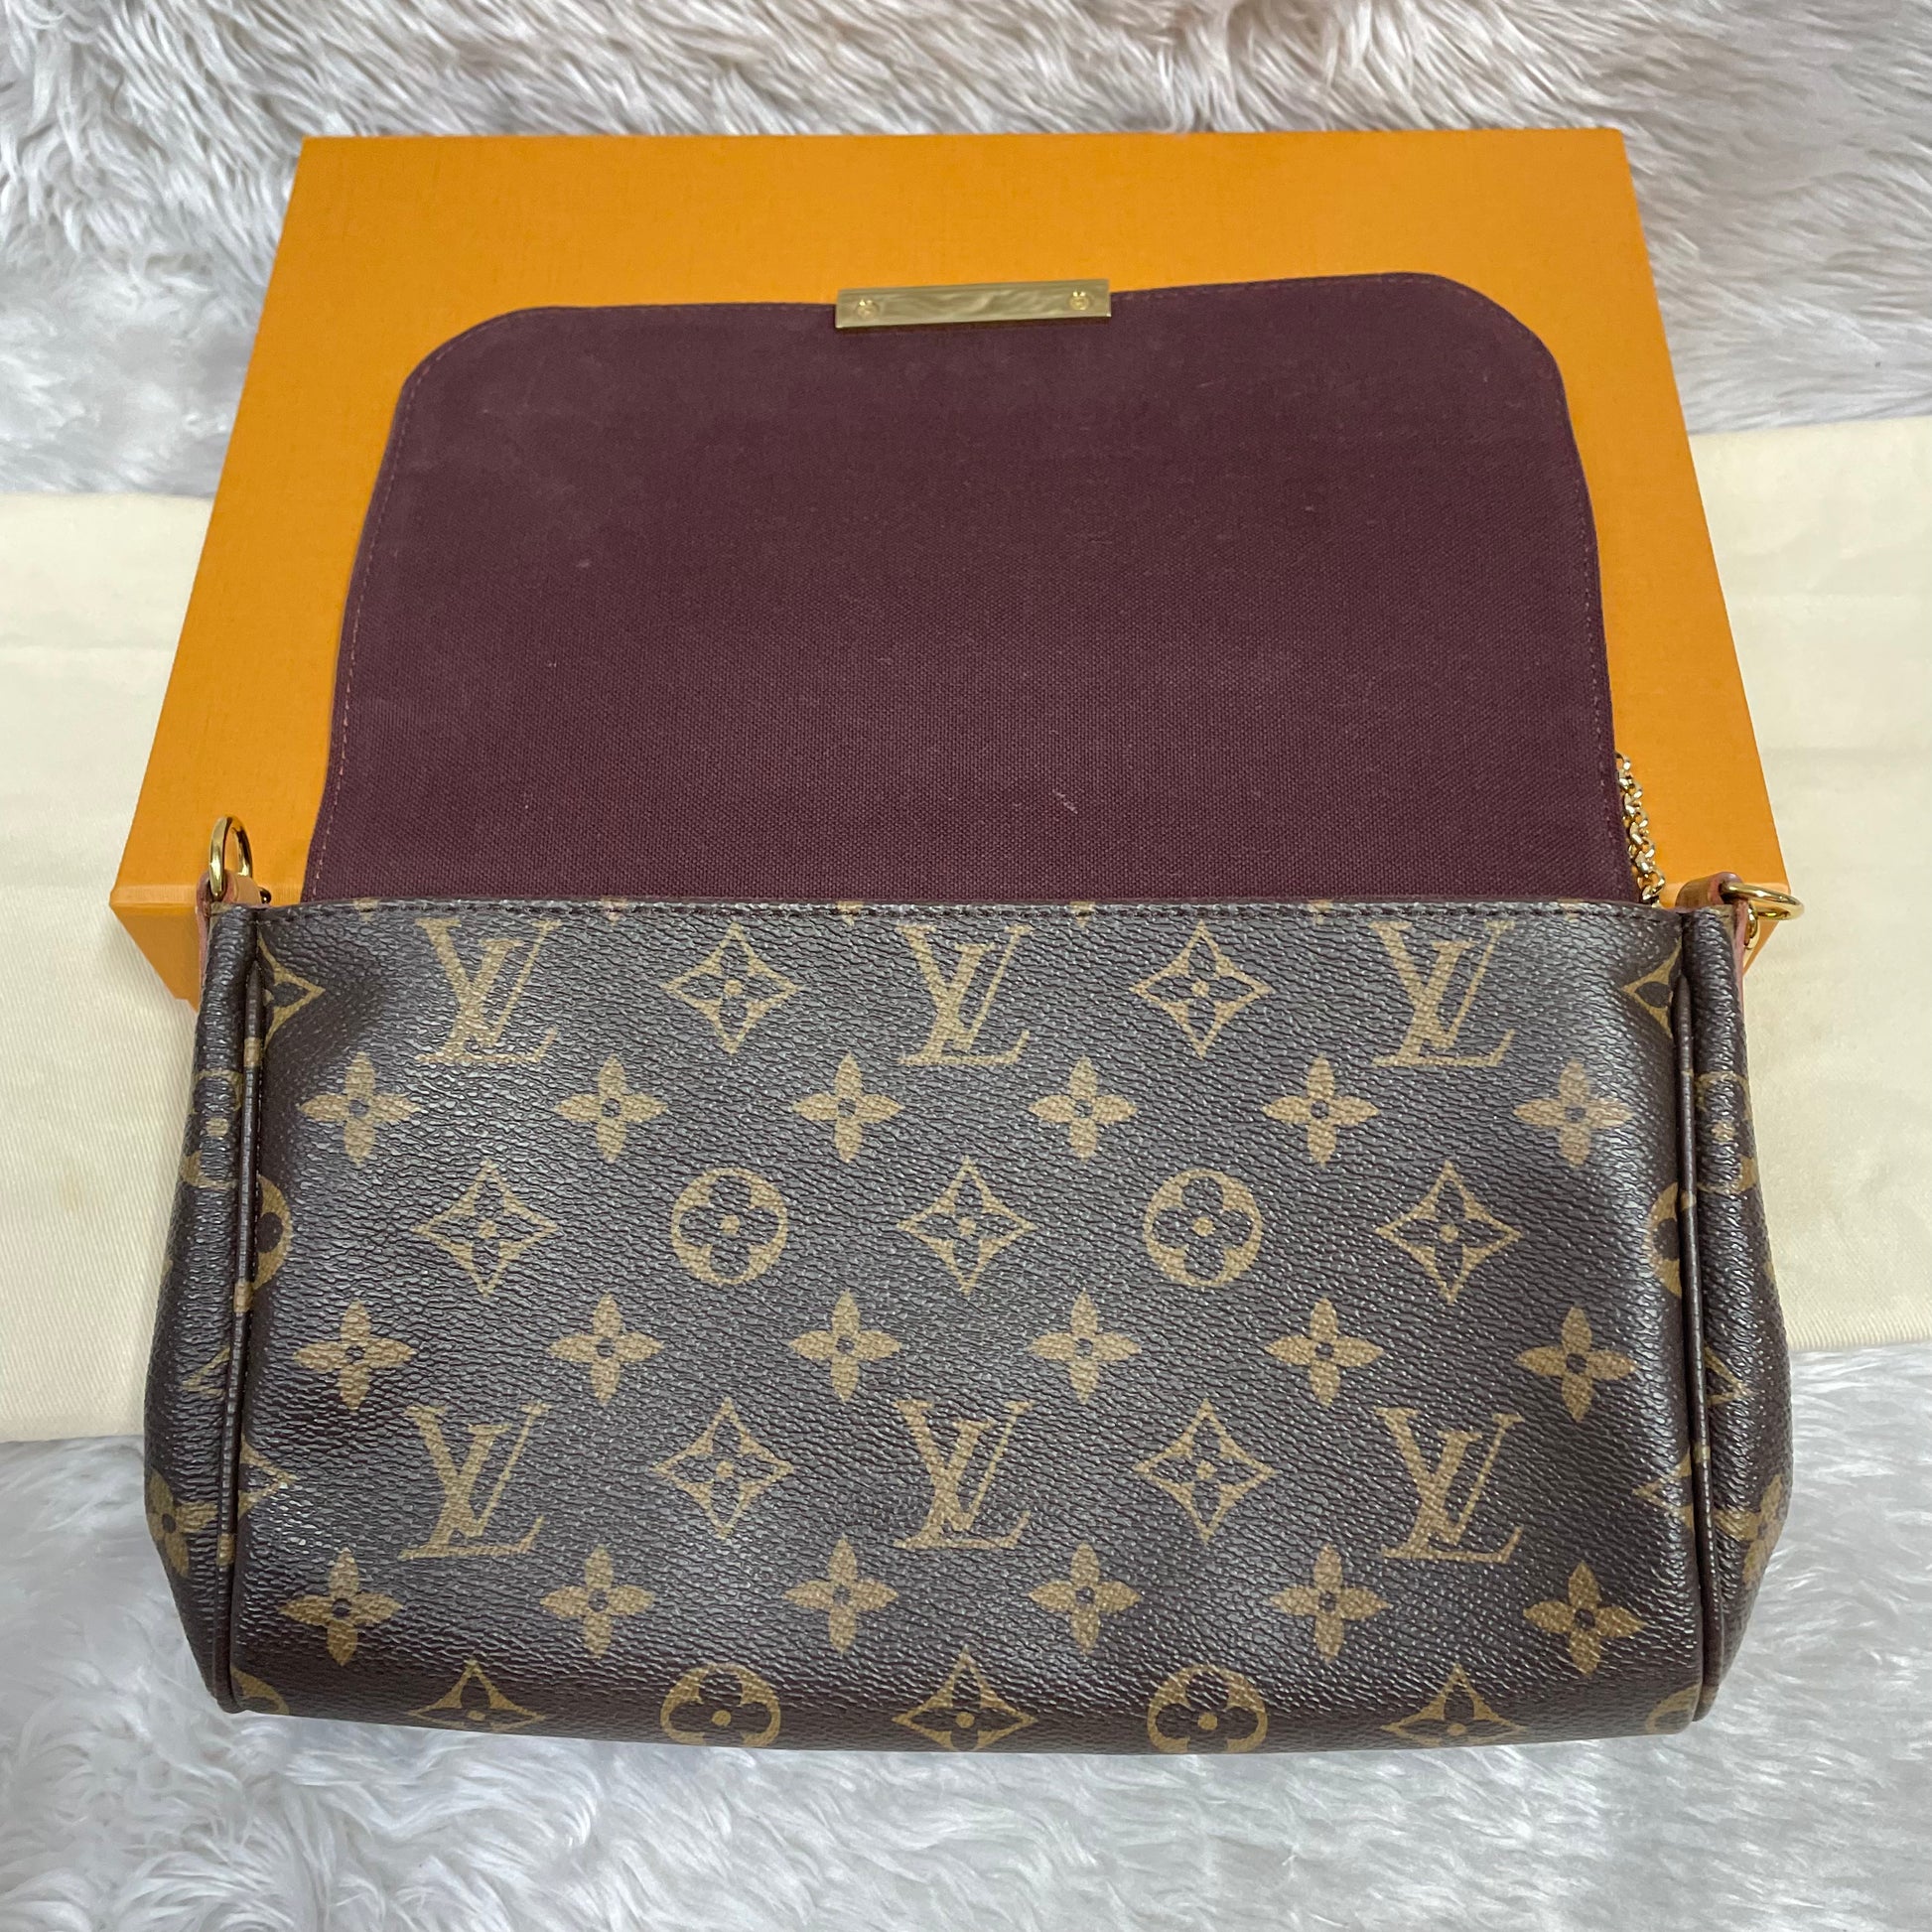 Authentic Favorite mm monogram with dust bag and box (SA4198 date code –  MKS BRAND